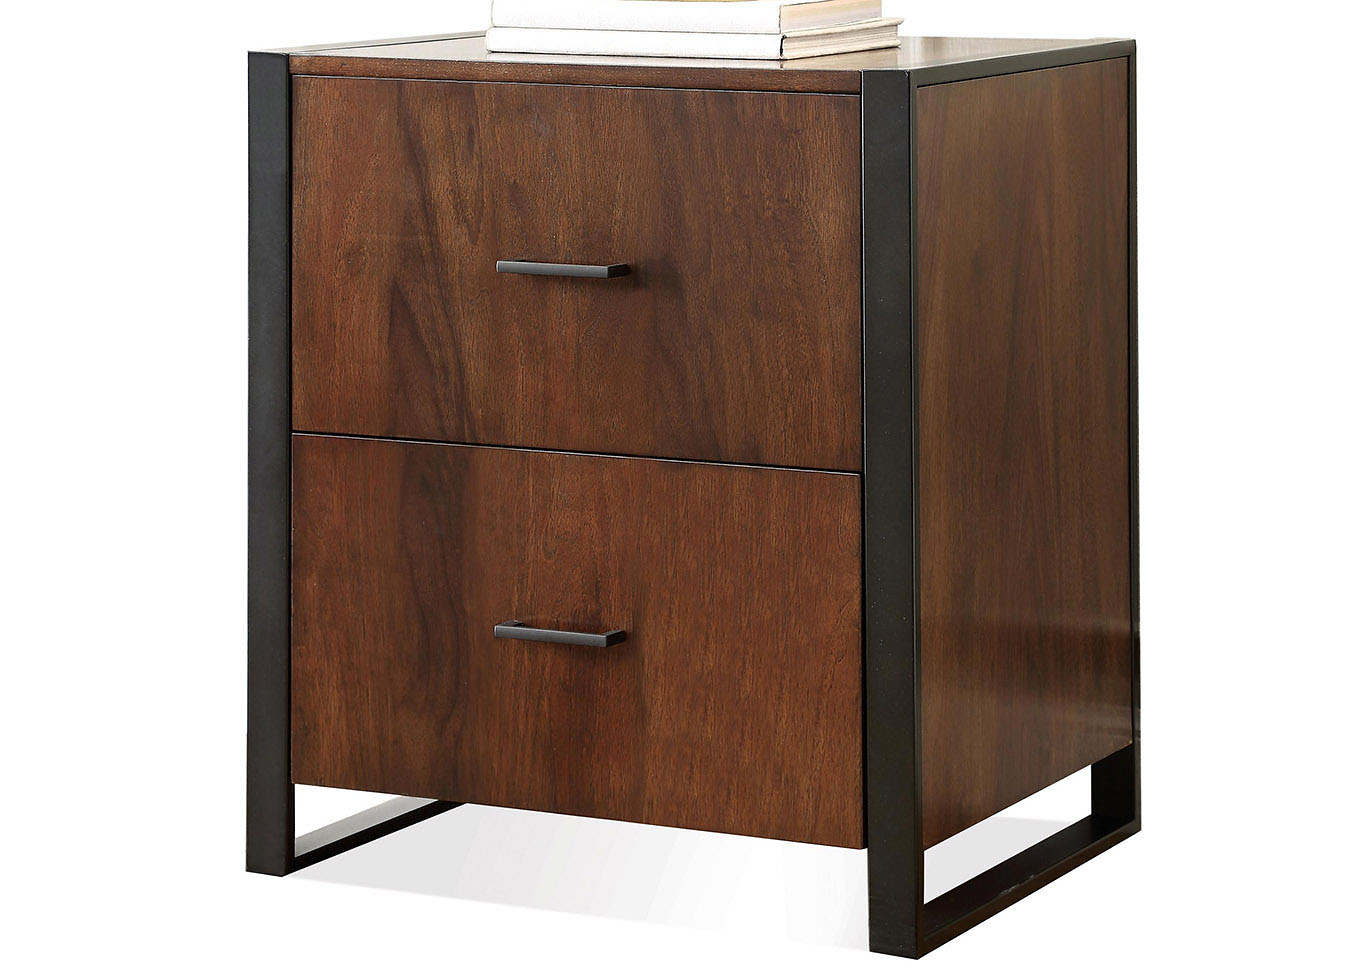 Furniture More Galleries Terra Vista Walnut File Cabinet within sizing 1366 X 968